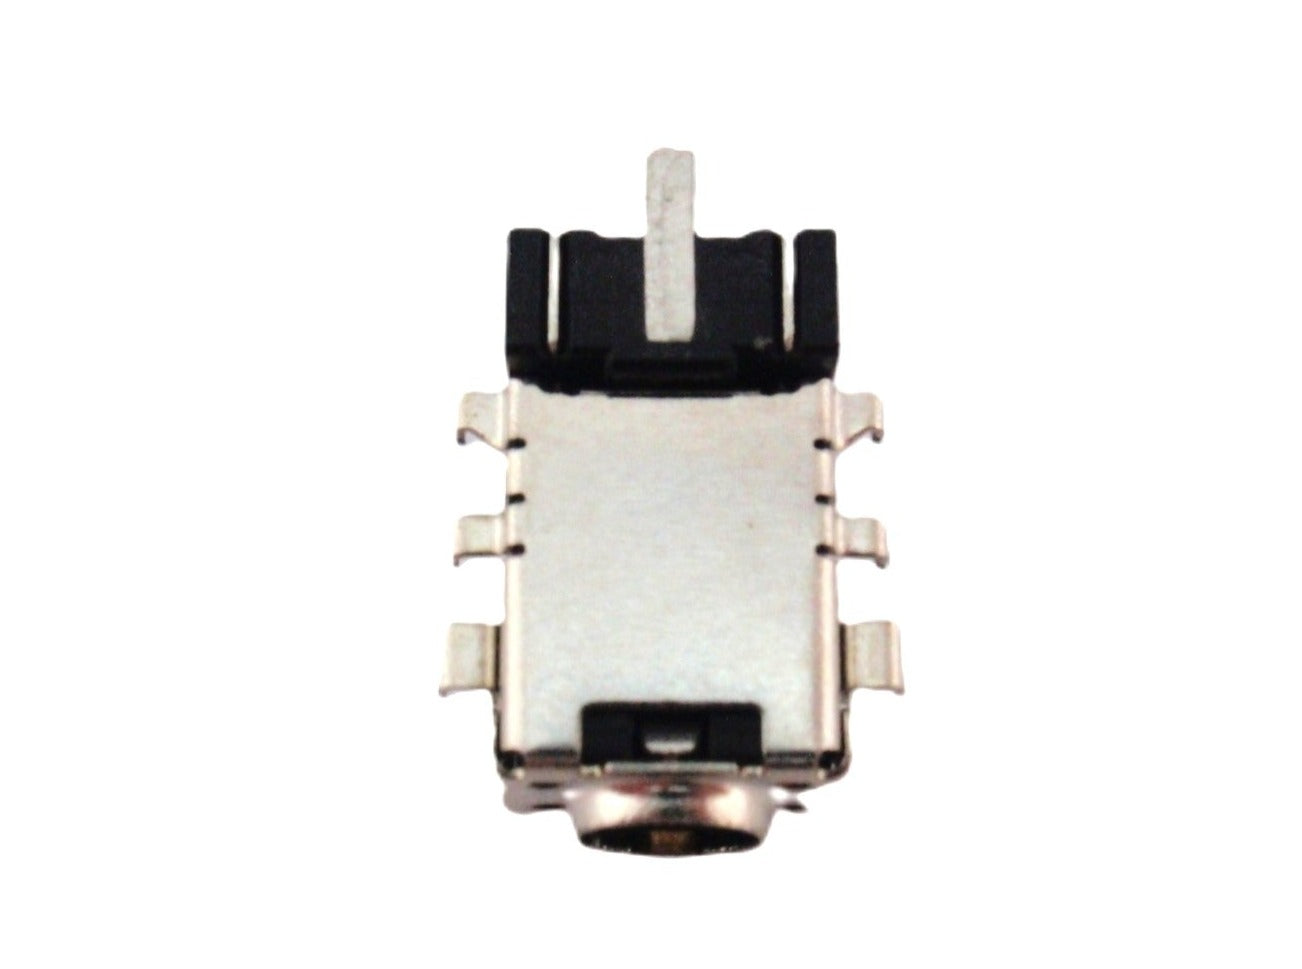 ASUS New DC In Power Jack Charging Port Connector Socket F556U F556UA F556UB F556UF F556UJ F556UZ F556UR F556UV